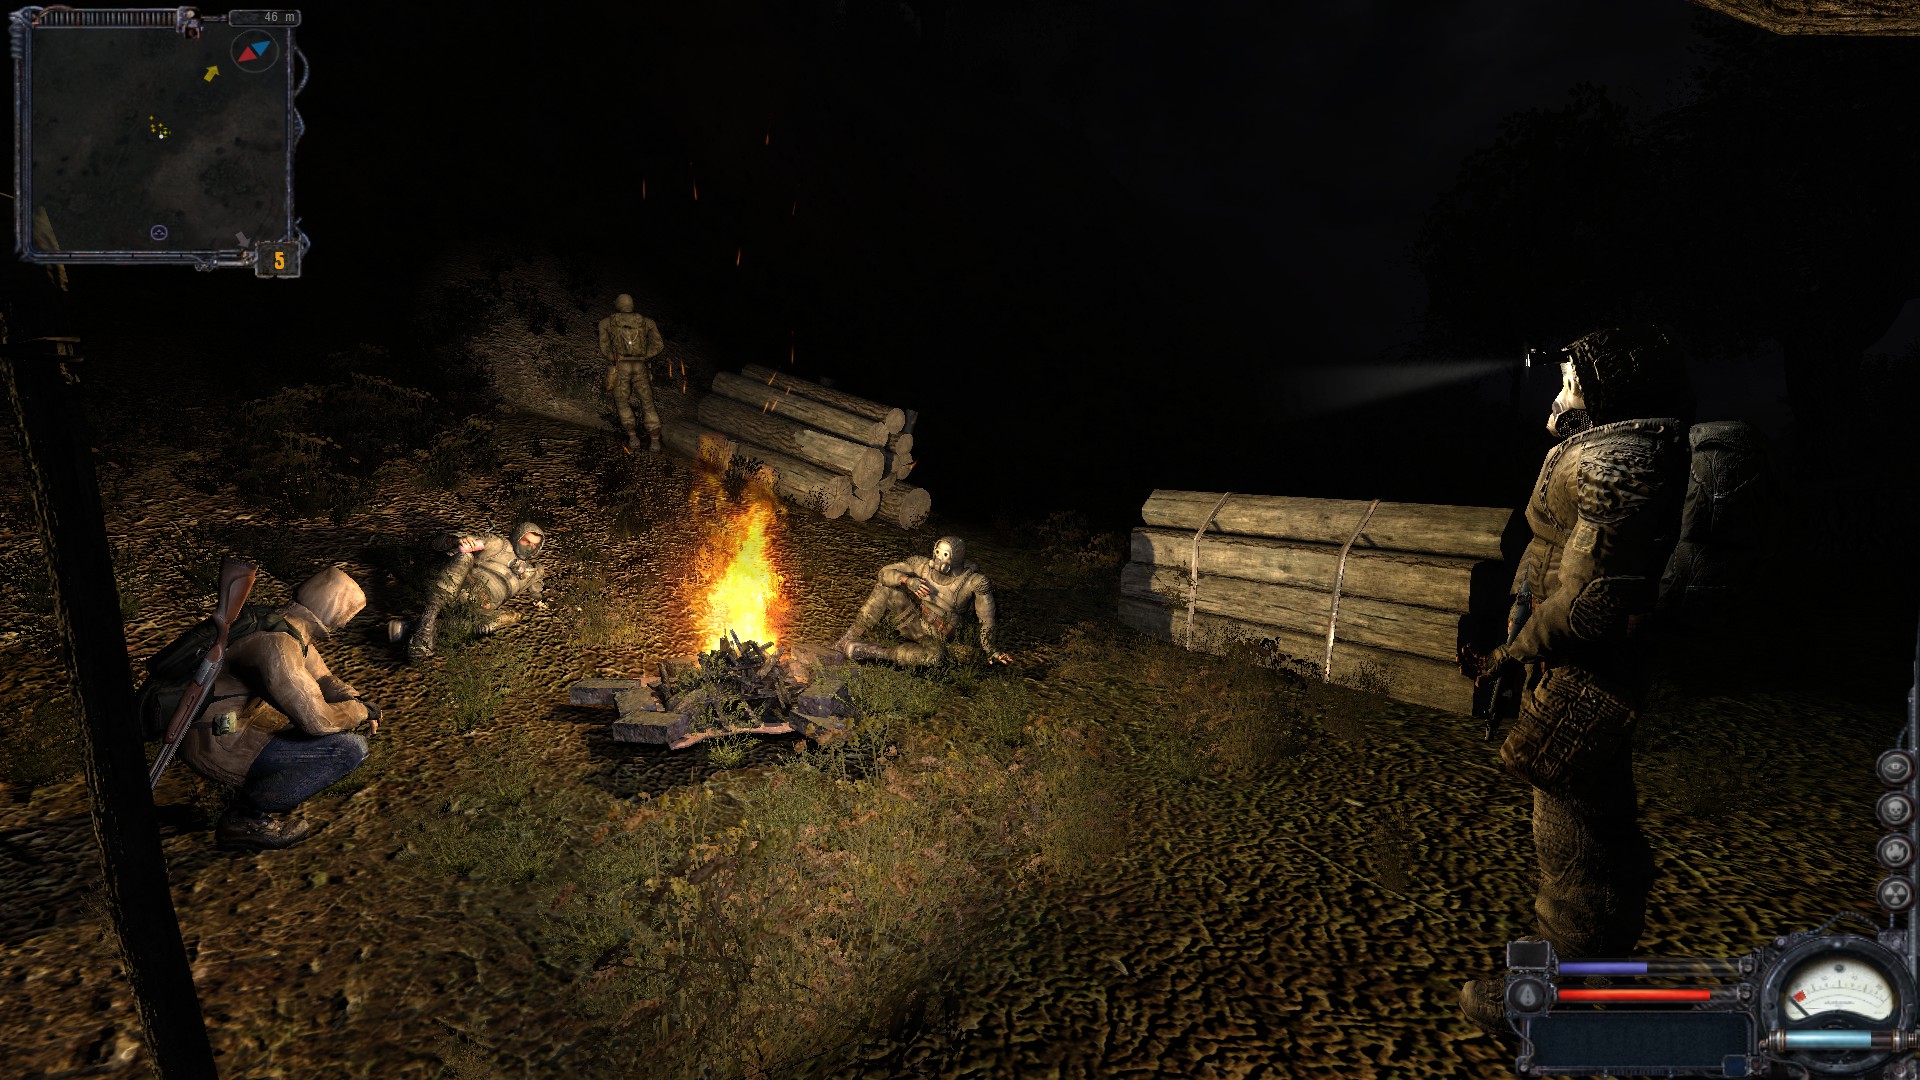 A group of stalkers around a fire in the night.